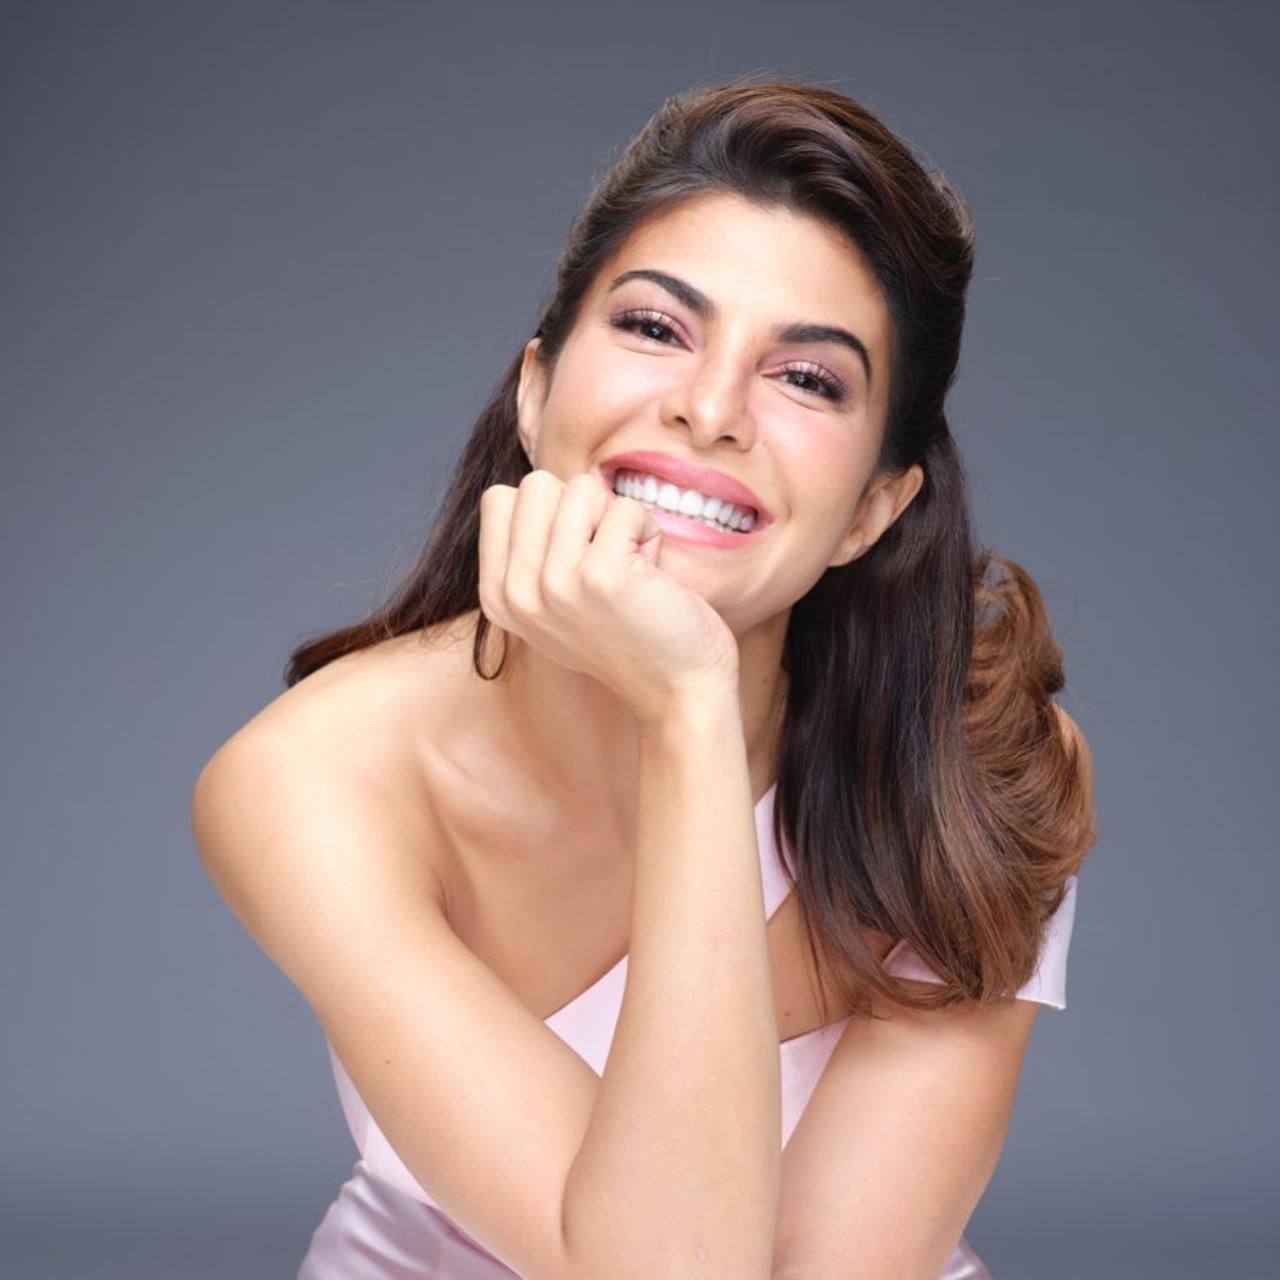 This picture is a solid example of Jacqueline's energy. The actress is full of positivity, optimism, and determination